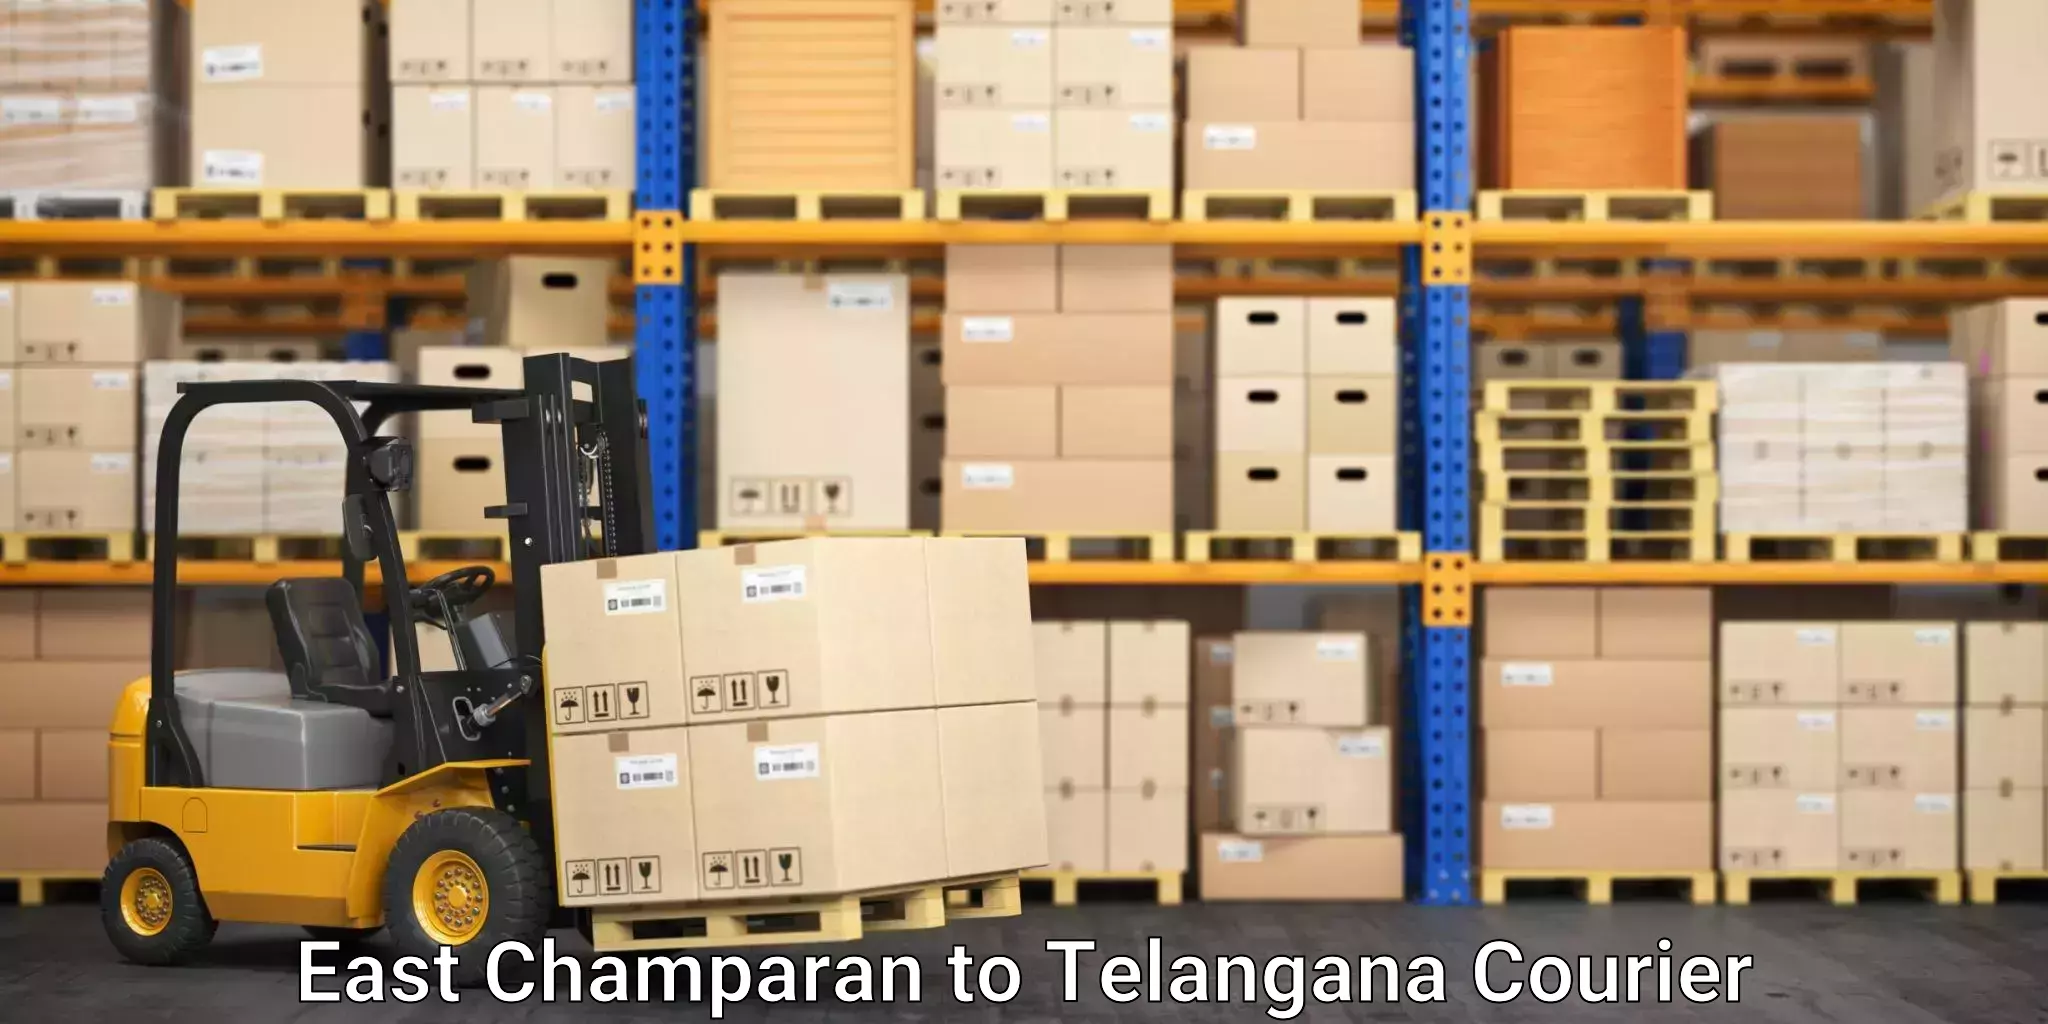 Reliable relocation services in East Champaran to Telangana